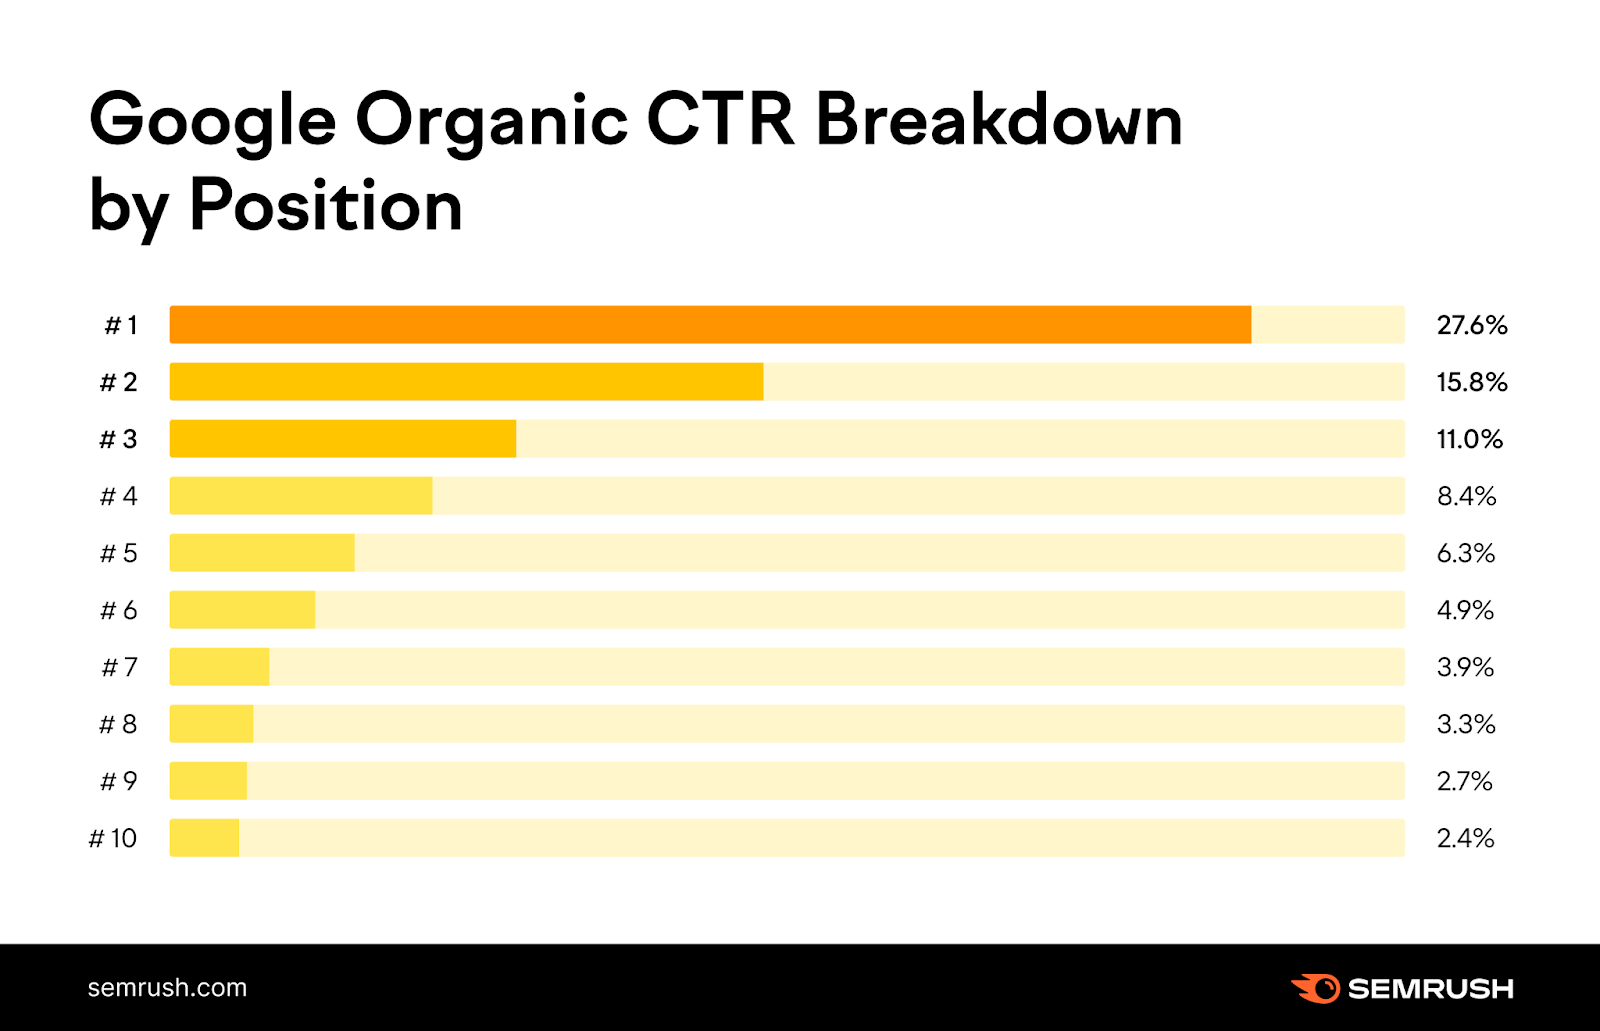 An infographic by Semrush showing Google organic CTR breakdown by position